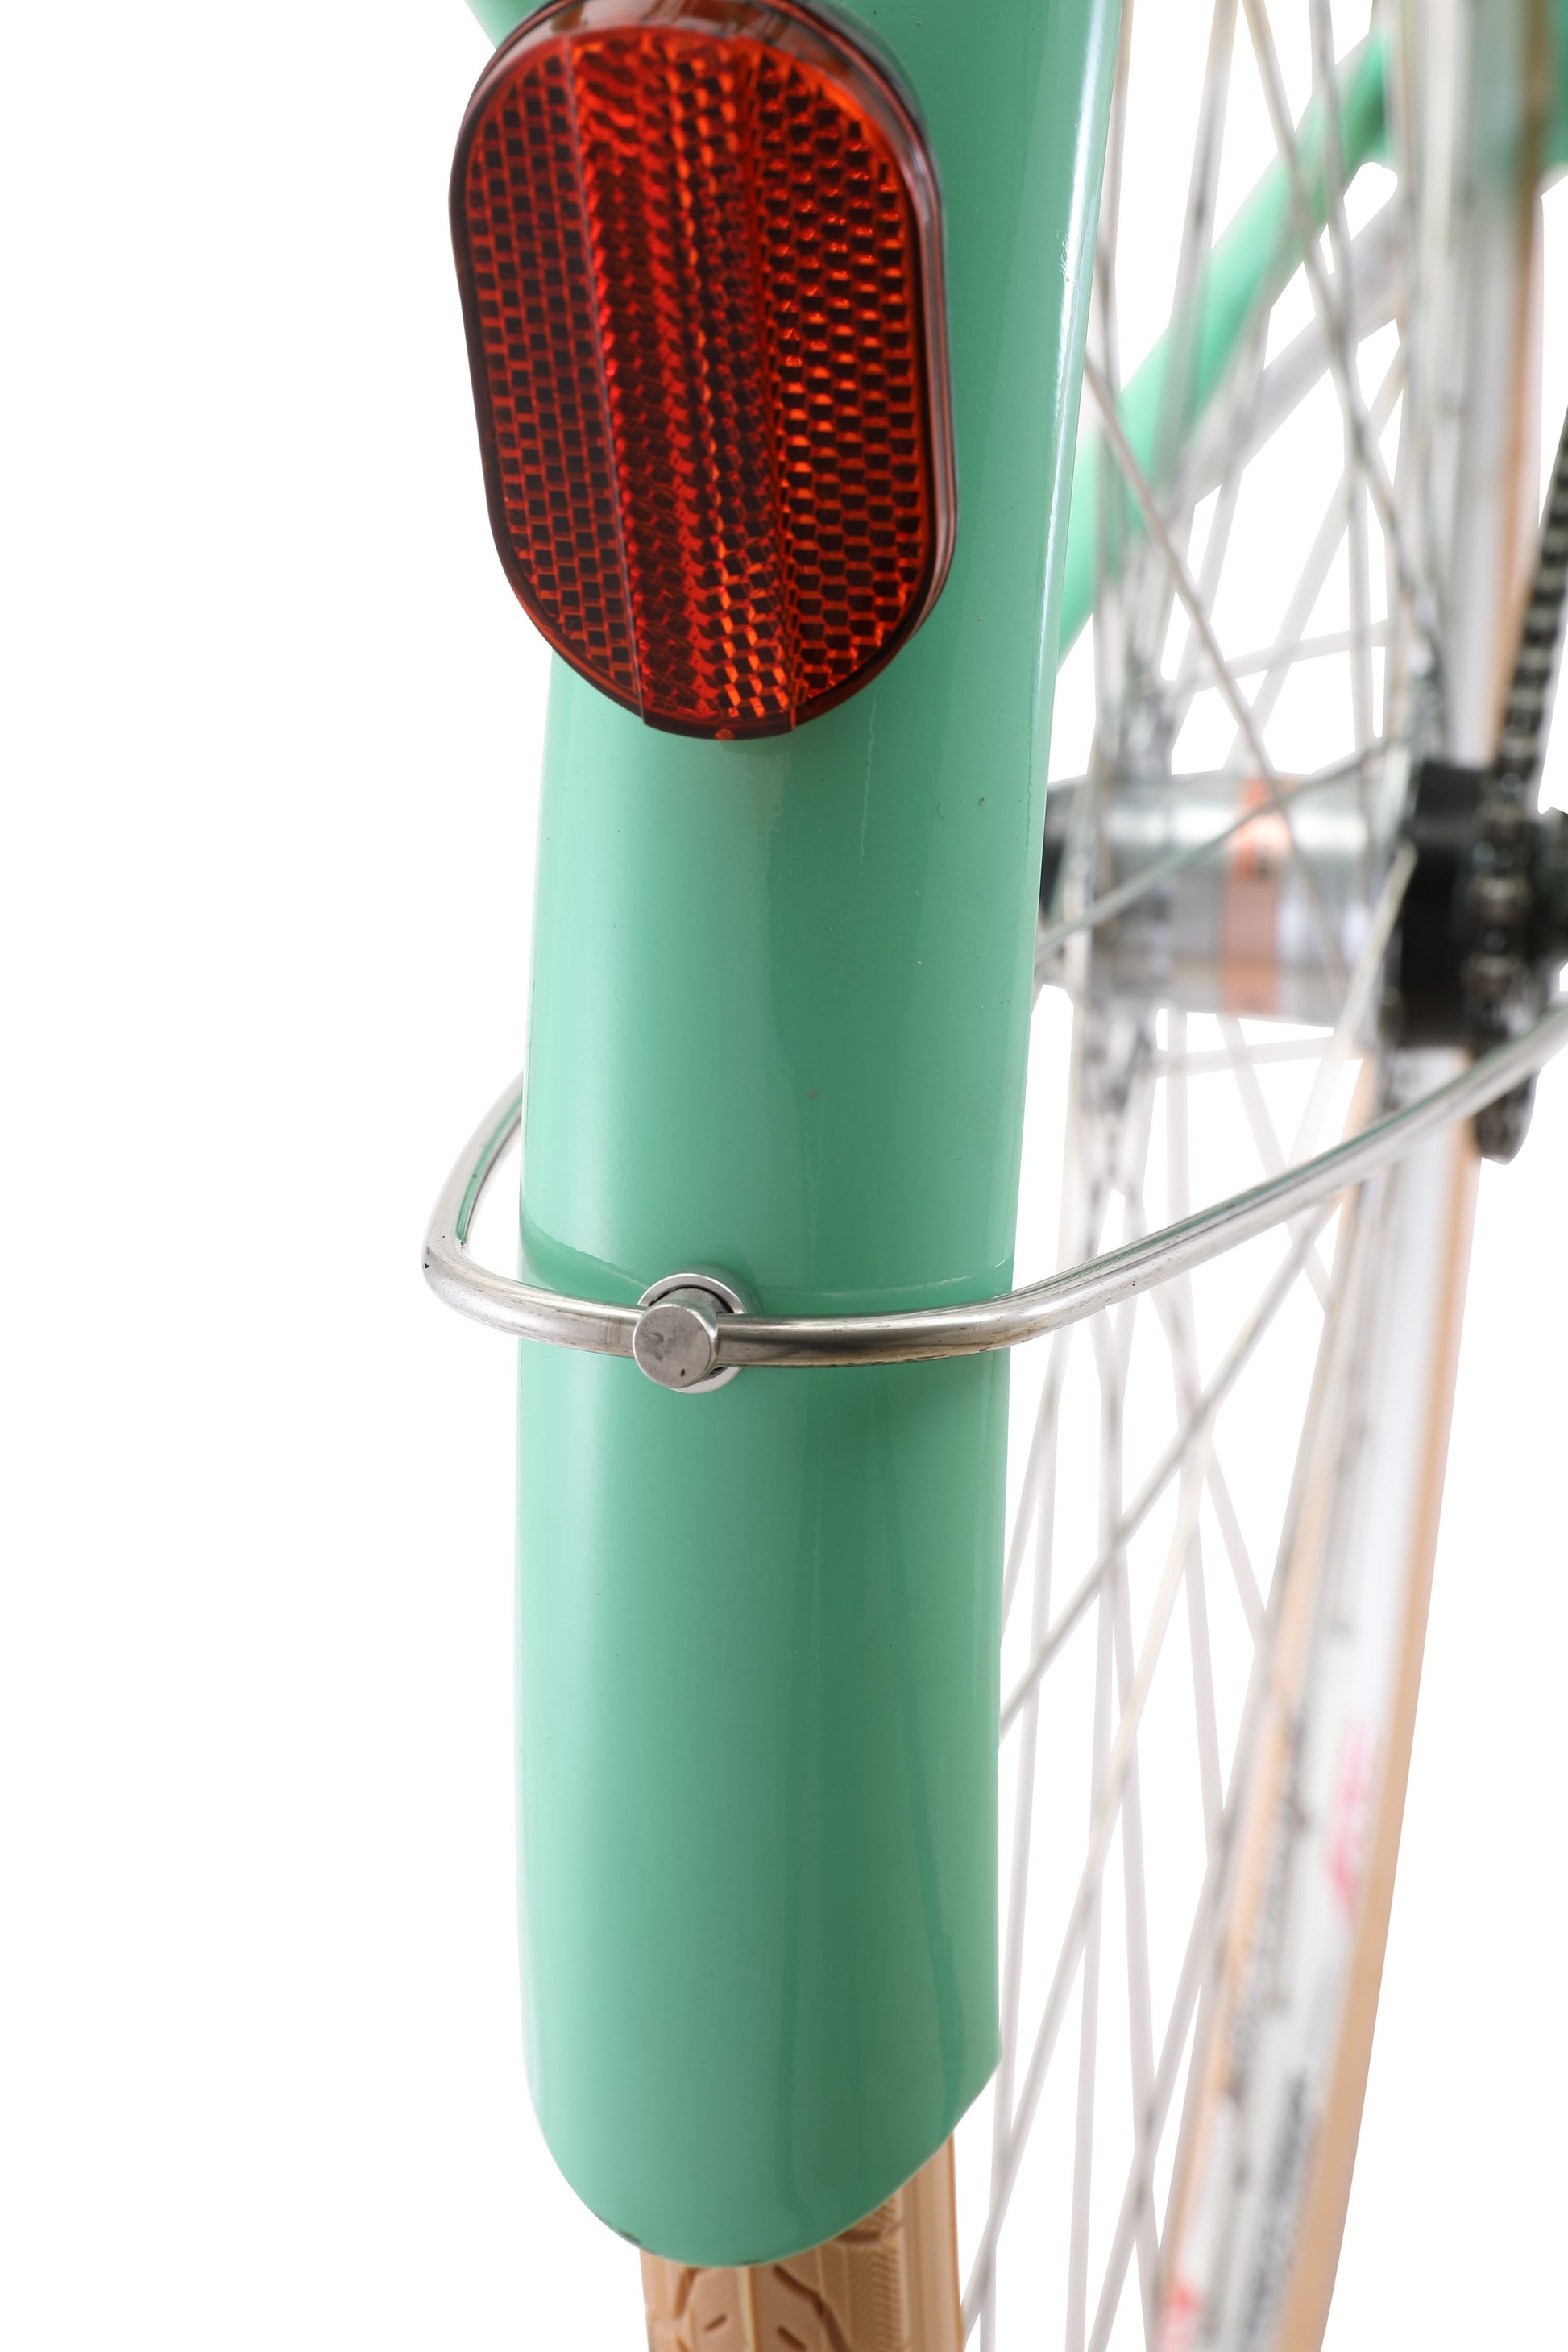 Ladies Deluxe Vintage Bike in Mint Green showing rear mudguard and red reflector from Reid Cycles Australia